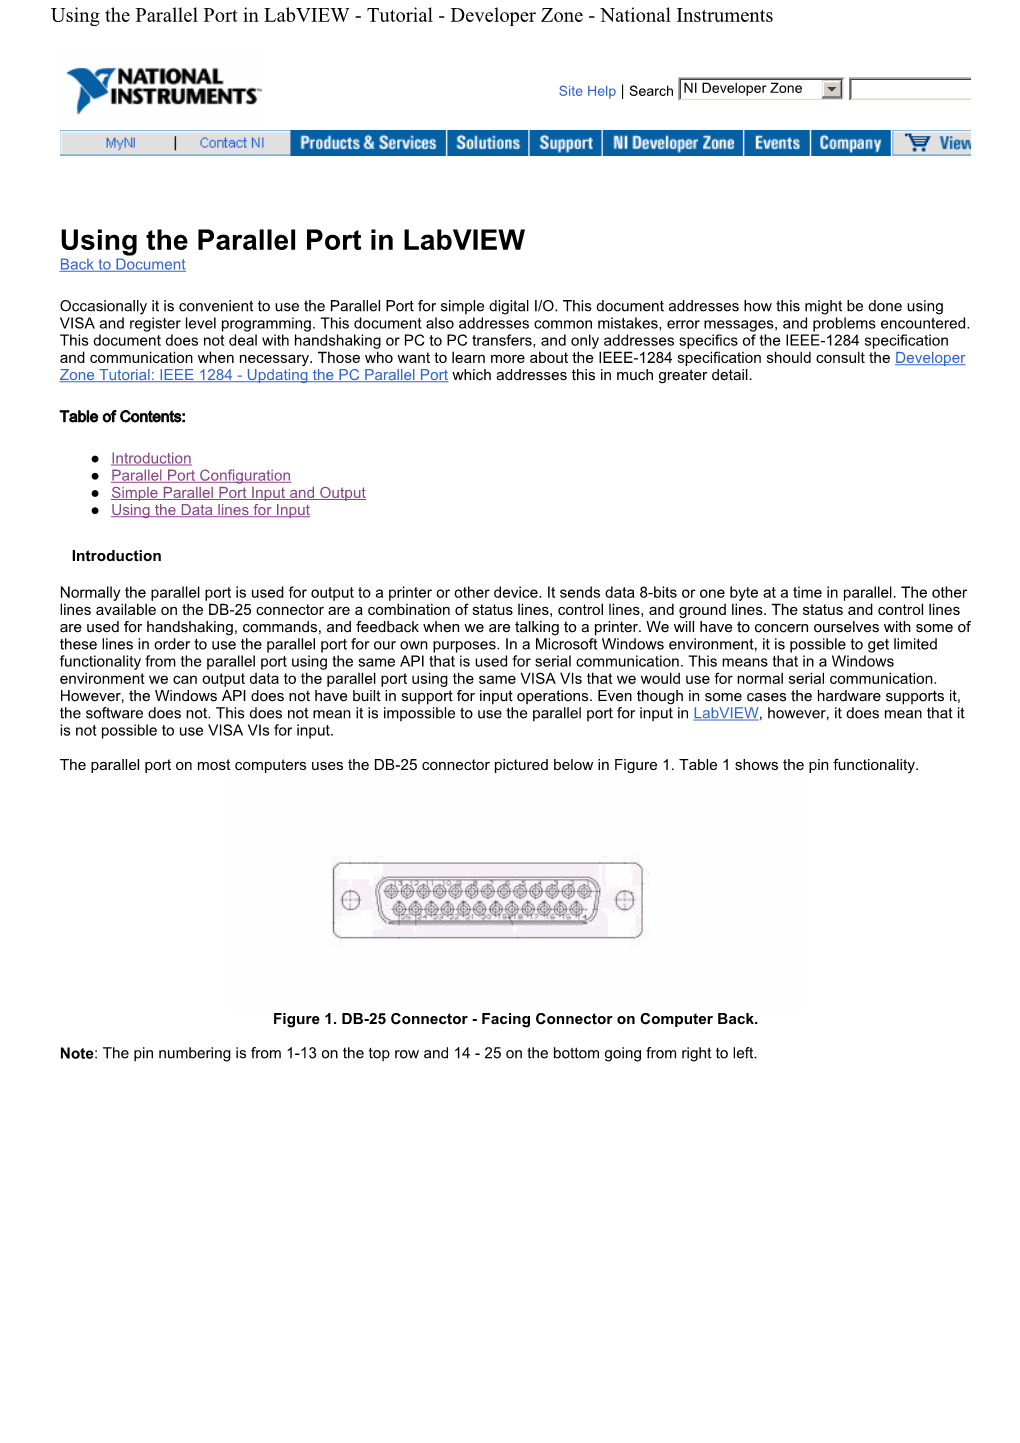 Using the Parallel Port in Labview - Tutorial - Developer Zone - National Instruments